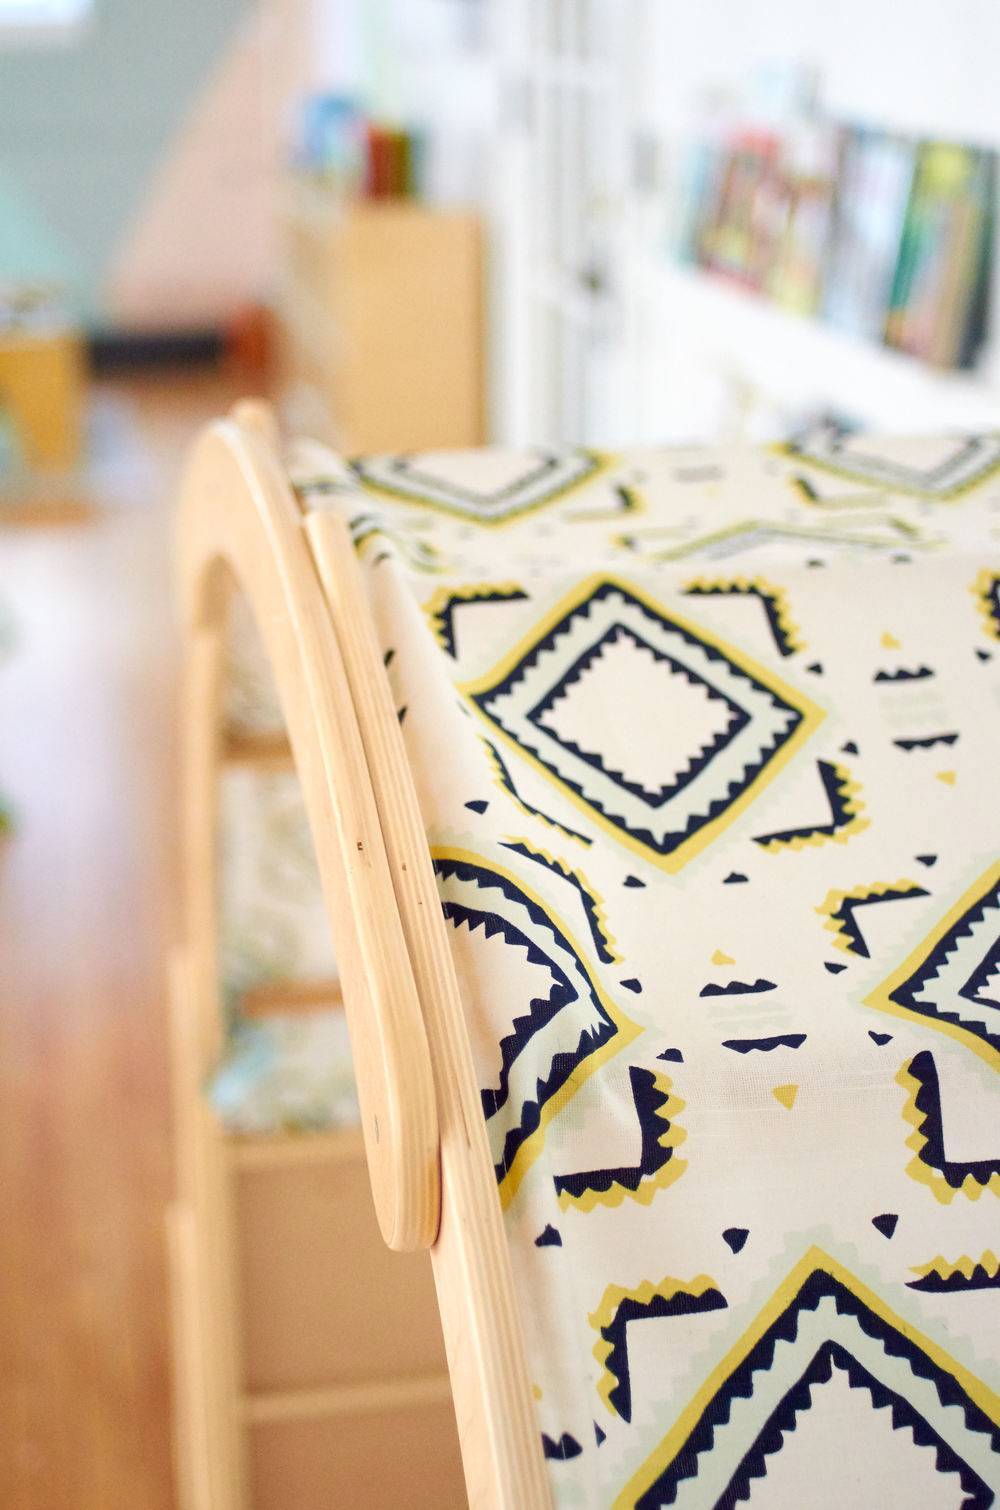 Geometric print on beige fabric hangs over a natural wood frame.